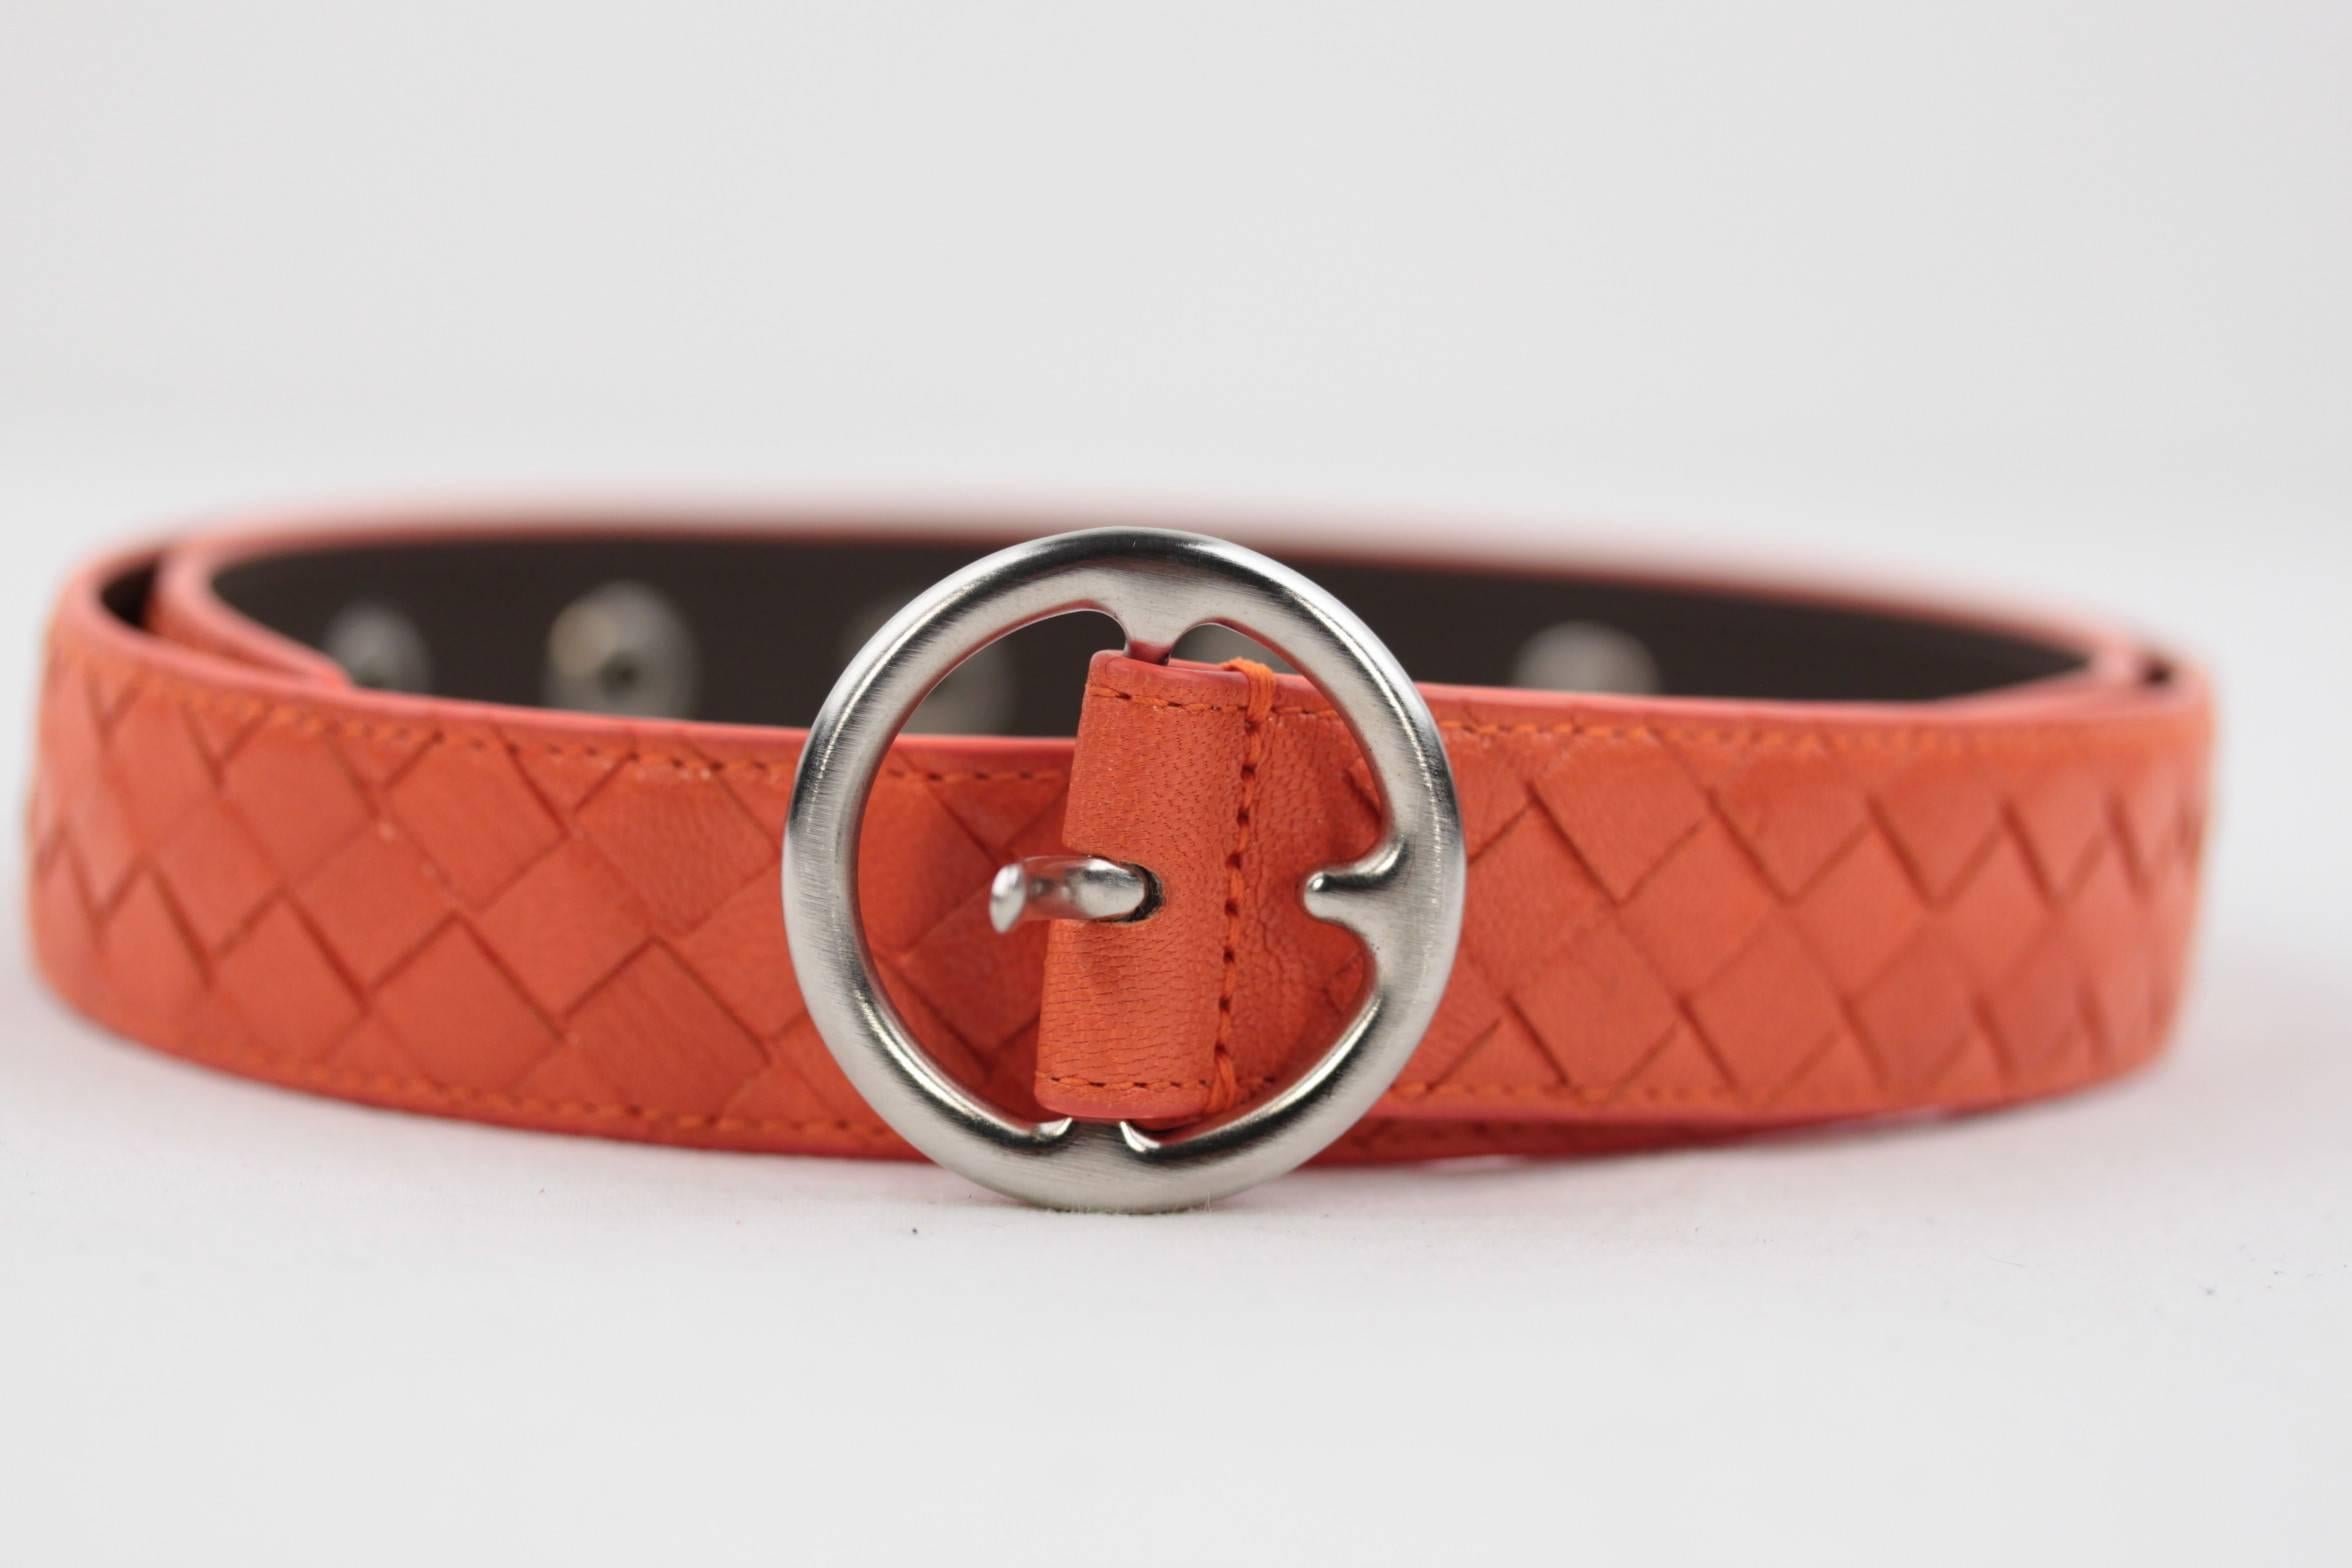 - Color: Orange
- Intrecciato woven leather strap with smooth leather underside
- Matte silver metal round buckle - Single prong closure
- 5-hole adjustment
- Size: 80 /32 (the size is engraved on the reverse of the belt)
- 1 1/2 inches - 3,7